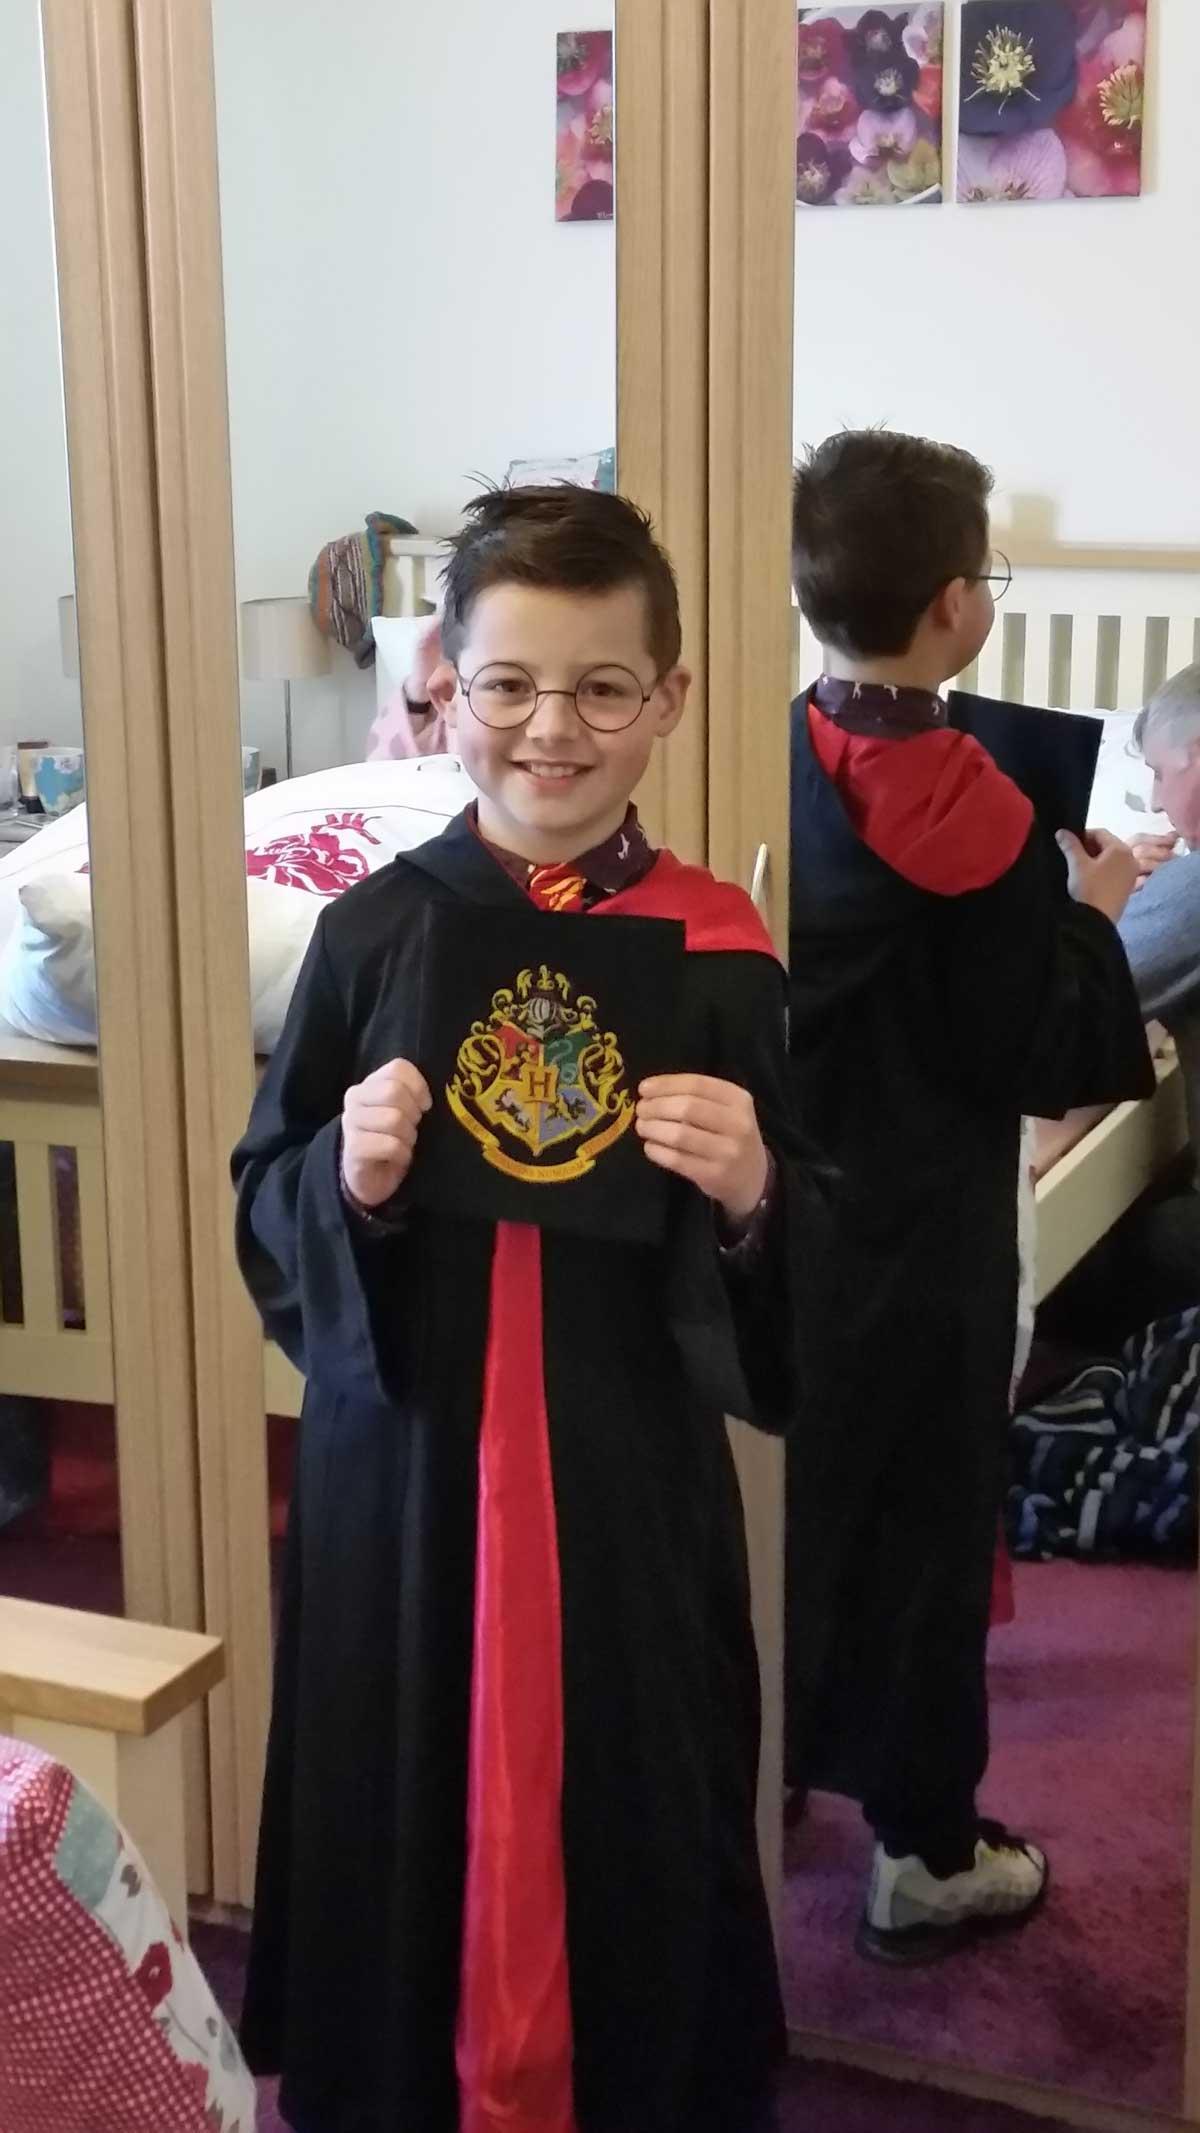 Taylor as Harry Potter